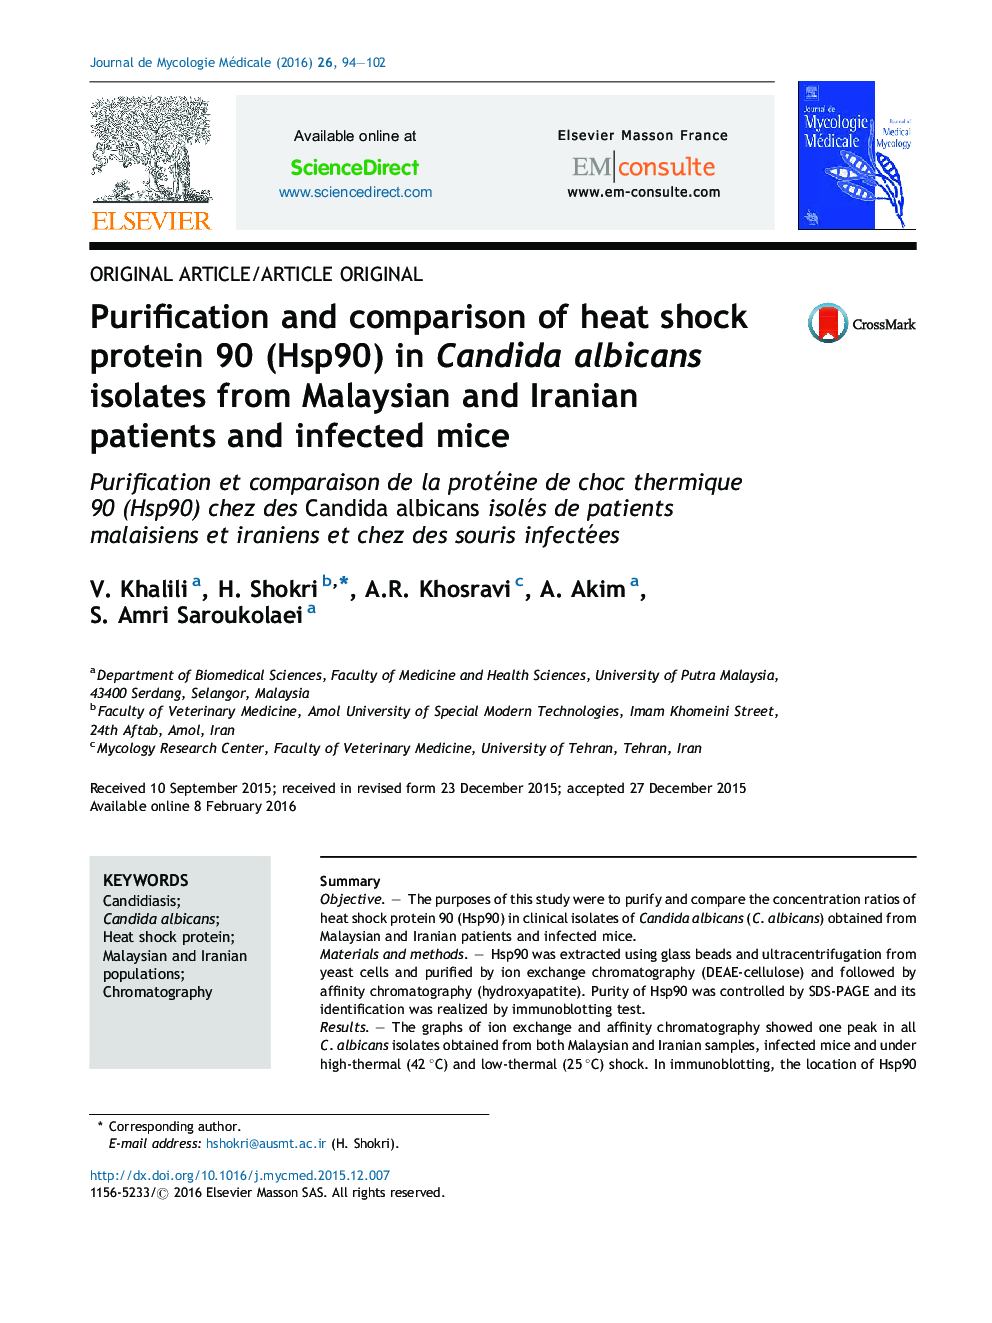 Purification and comparison of heat shock protein 90 (Hsp90) in Candida albicans isolates from Malaysian and Iranian patients and infected mice